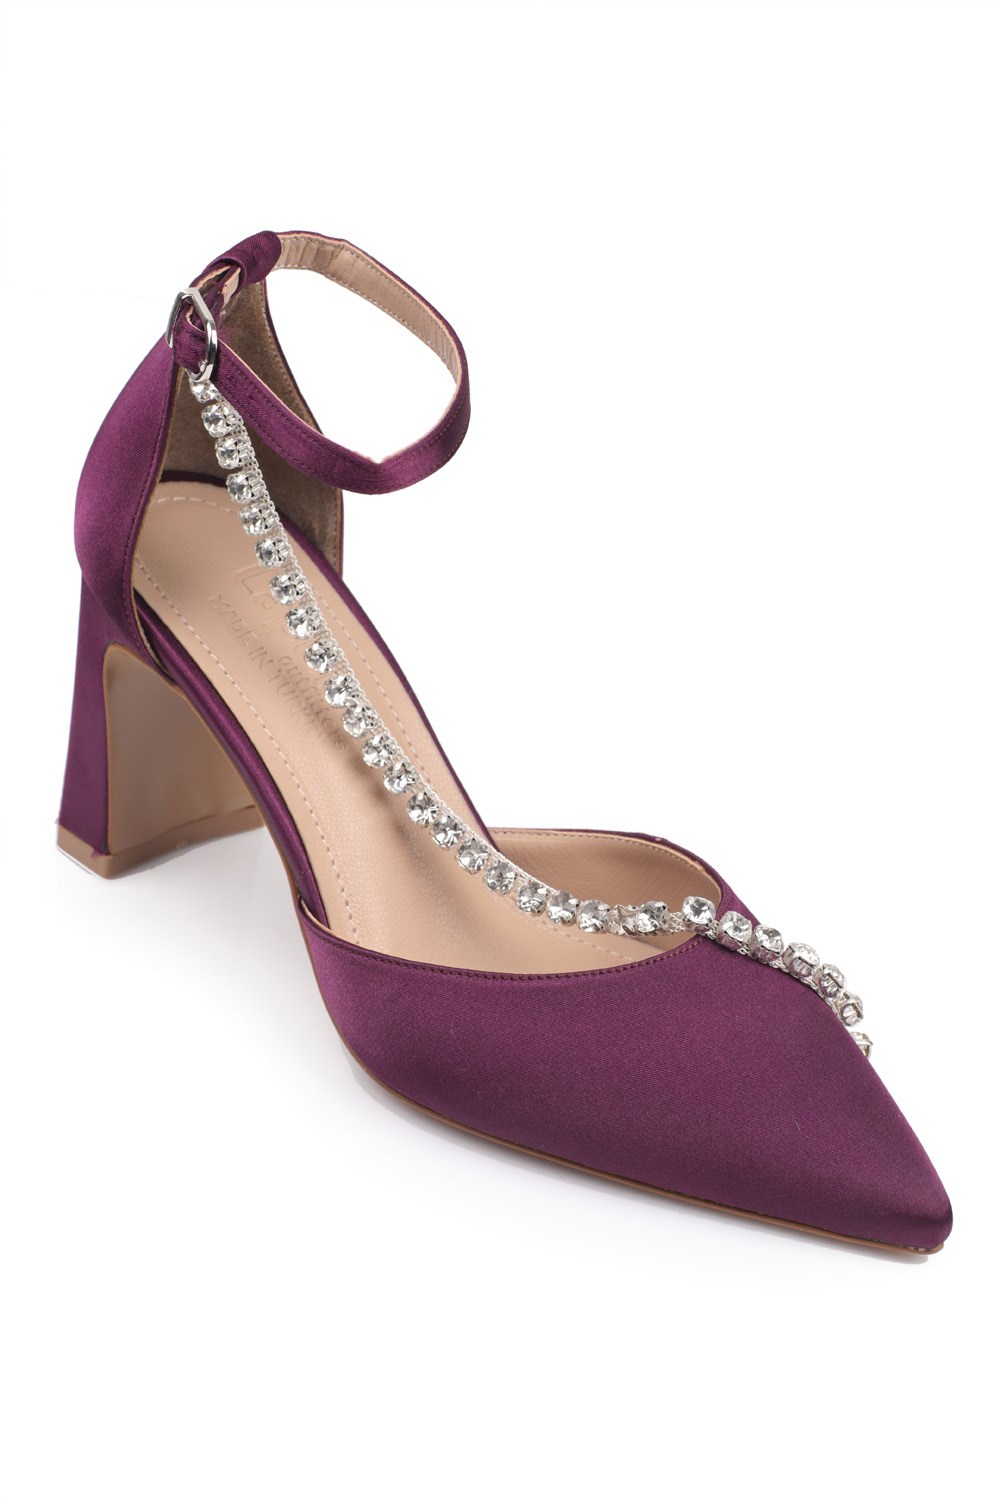 Capone Mid Heel Pointed Toe Cristal Embellished Slingback Satin Women  Purple Shoes | caponeoutfitters.com